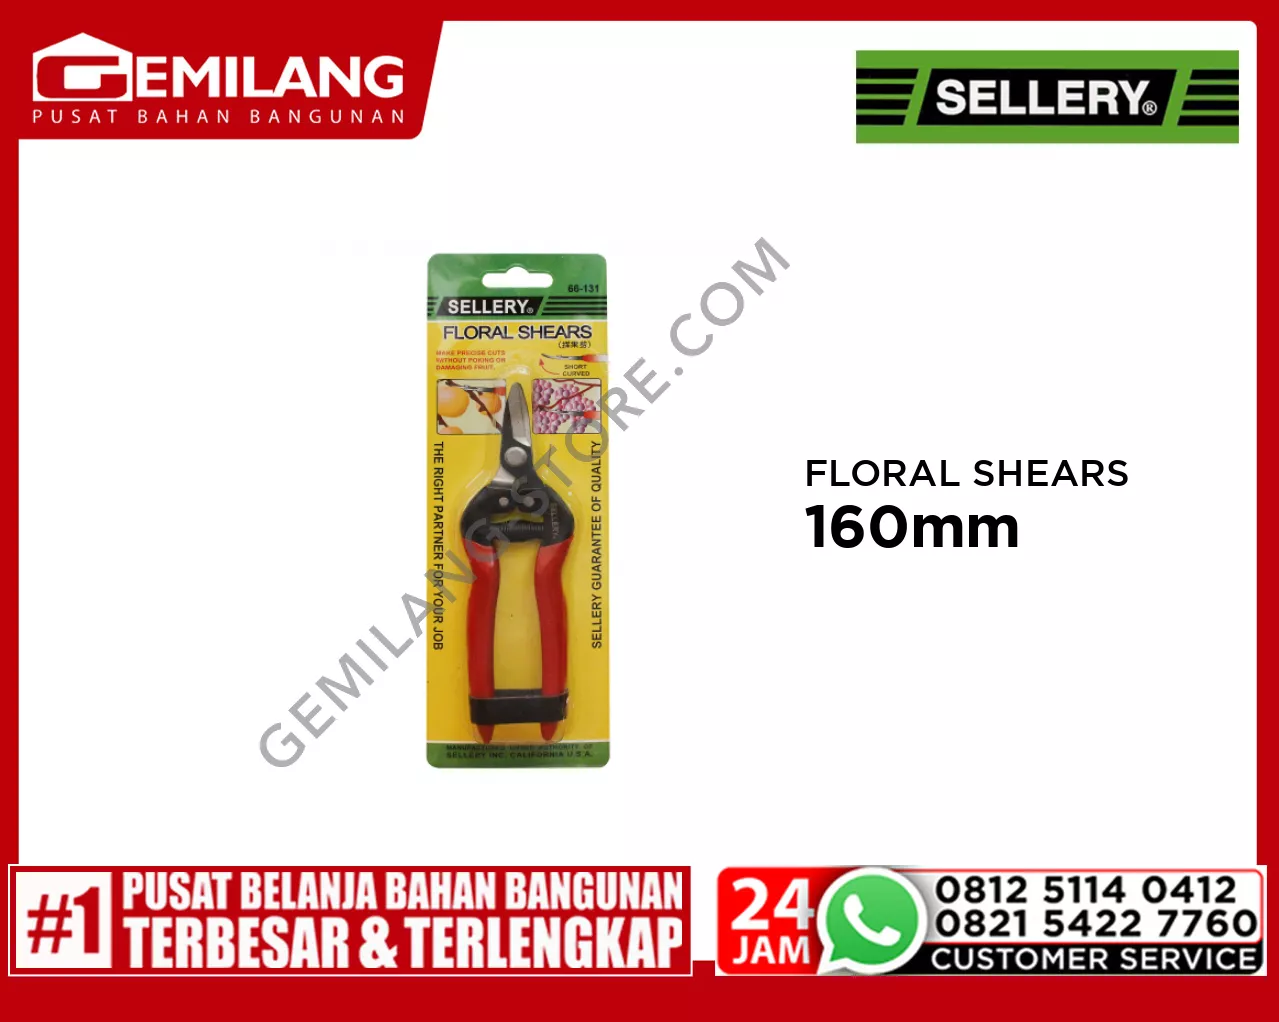 SELLERY FLORAL SHEARS 160mm (66-131)